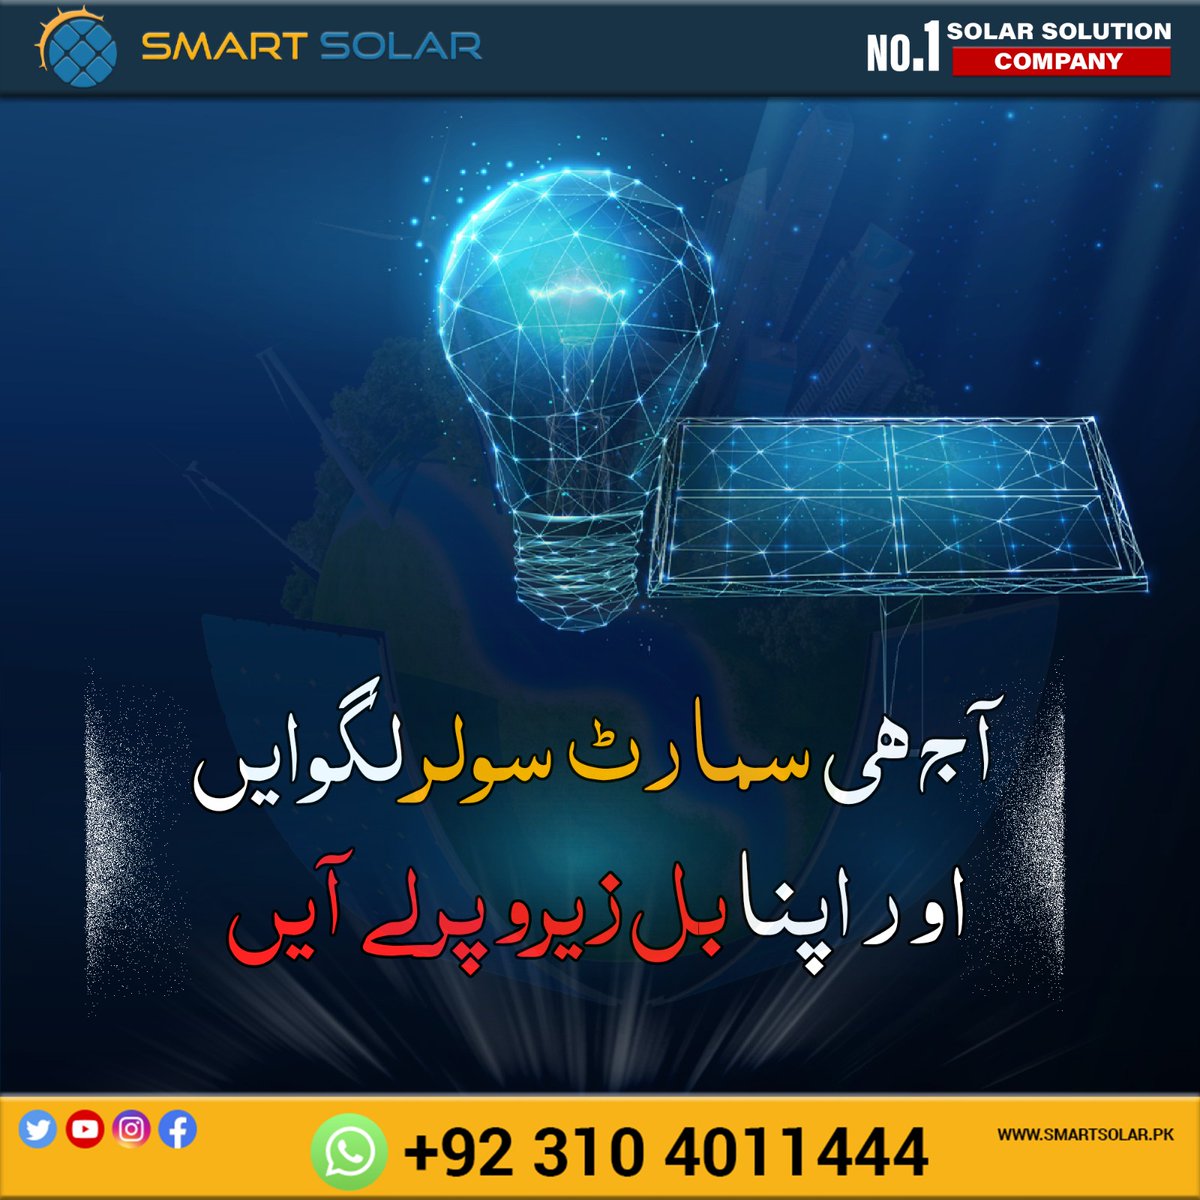 We #LightingTheWorld contact us for price and setup details! Solar Solutions For Your Home and Offices!
For more details please contact 0311-4011444
#SmartSolar #Solar #SolarPanels #SolarBatteries #SolarInverters #SolarInstallation #SolarHeater